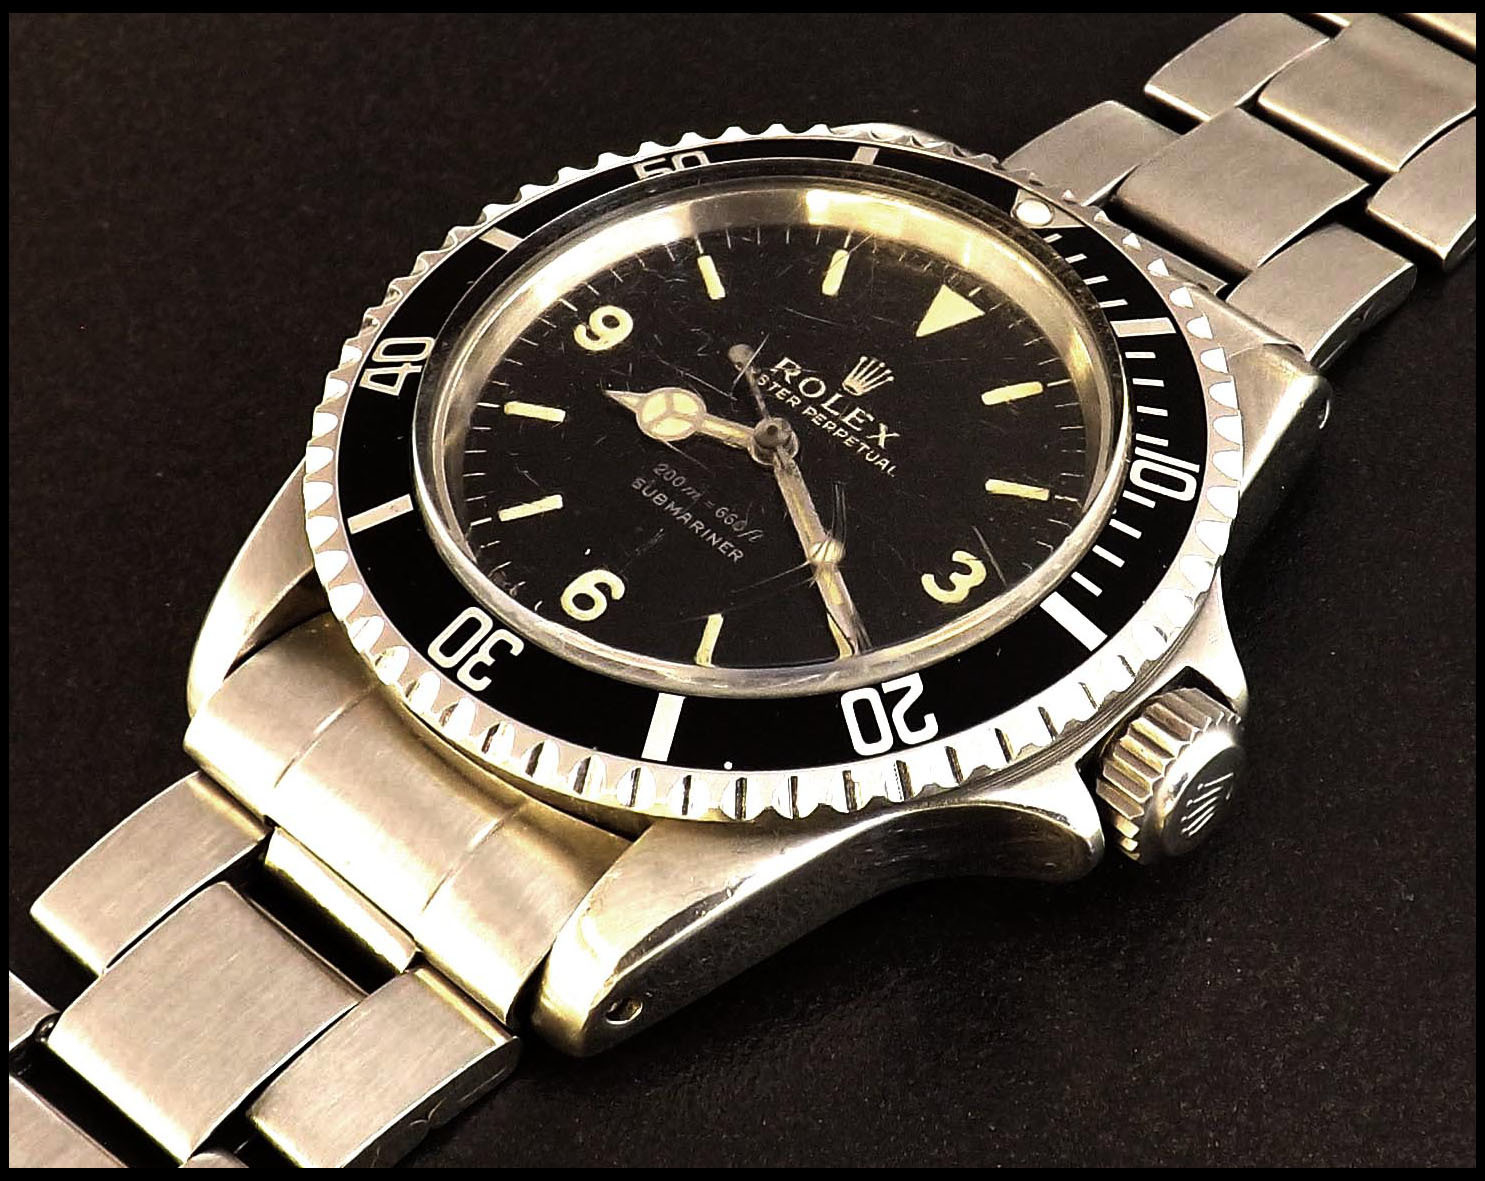 Auction of rare Rolex Oyster Perpetual Submariner watch, Wiltshire, UK - Feb 2017